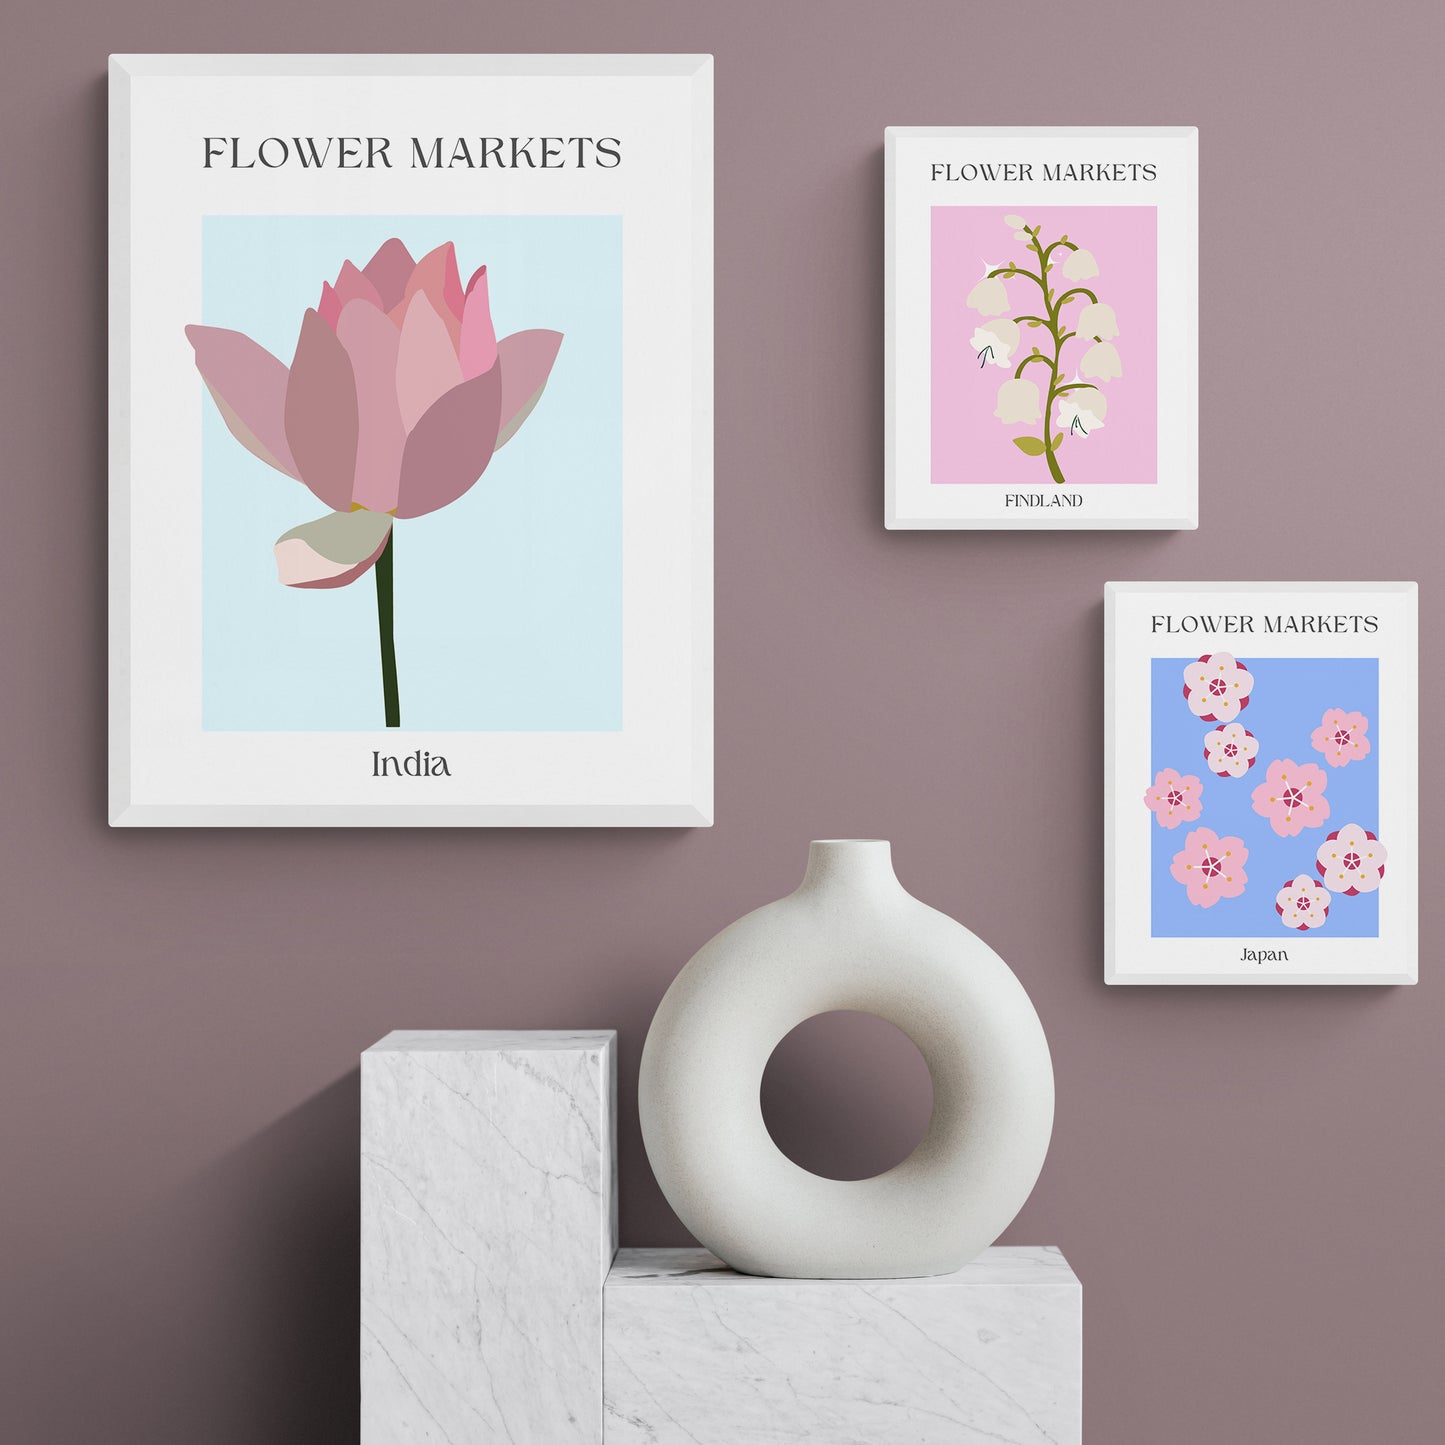 Bring nature into any room with this stunning British Columbia Flowers Market Print. The perfect statement piece for living rooms, bedrooms, and kitchens, this contemporary art print is ideal for any wall. Available in multiple sizes, its detailed and vibrant design will bring life and energy to any space.